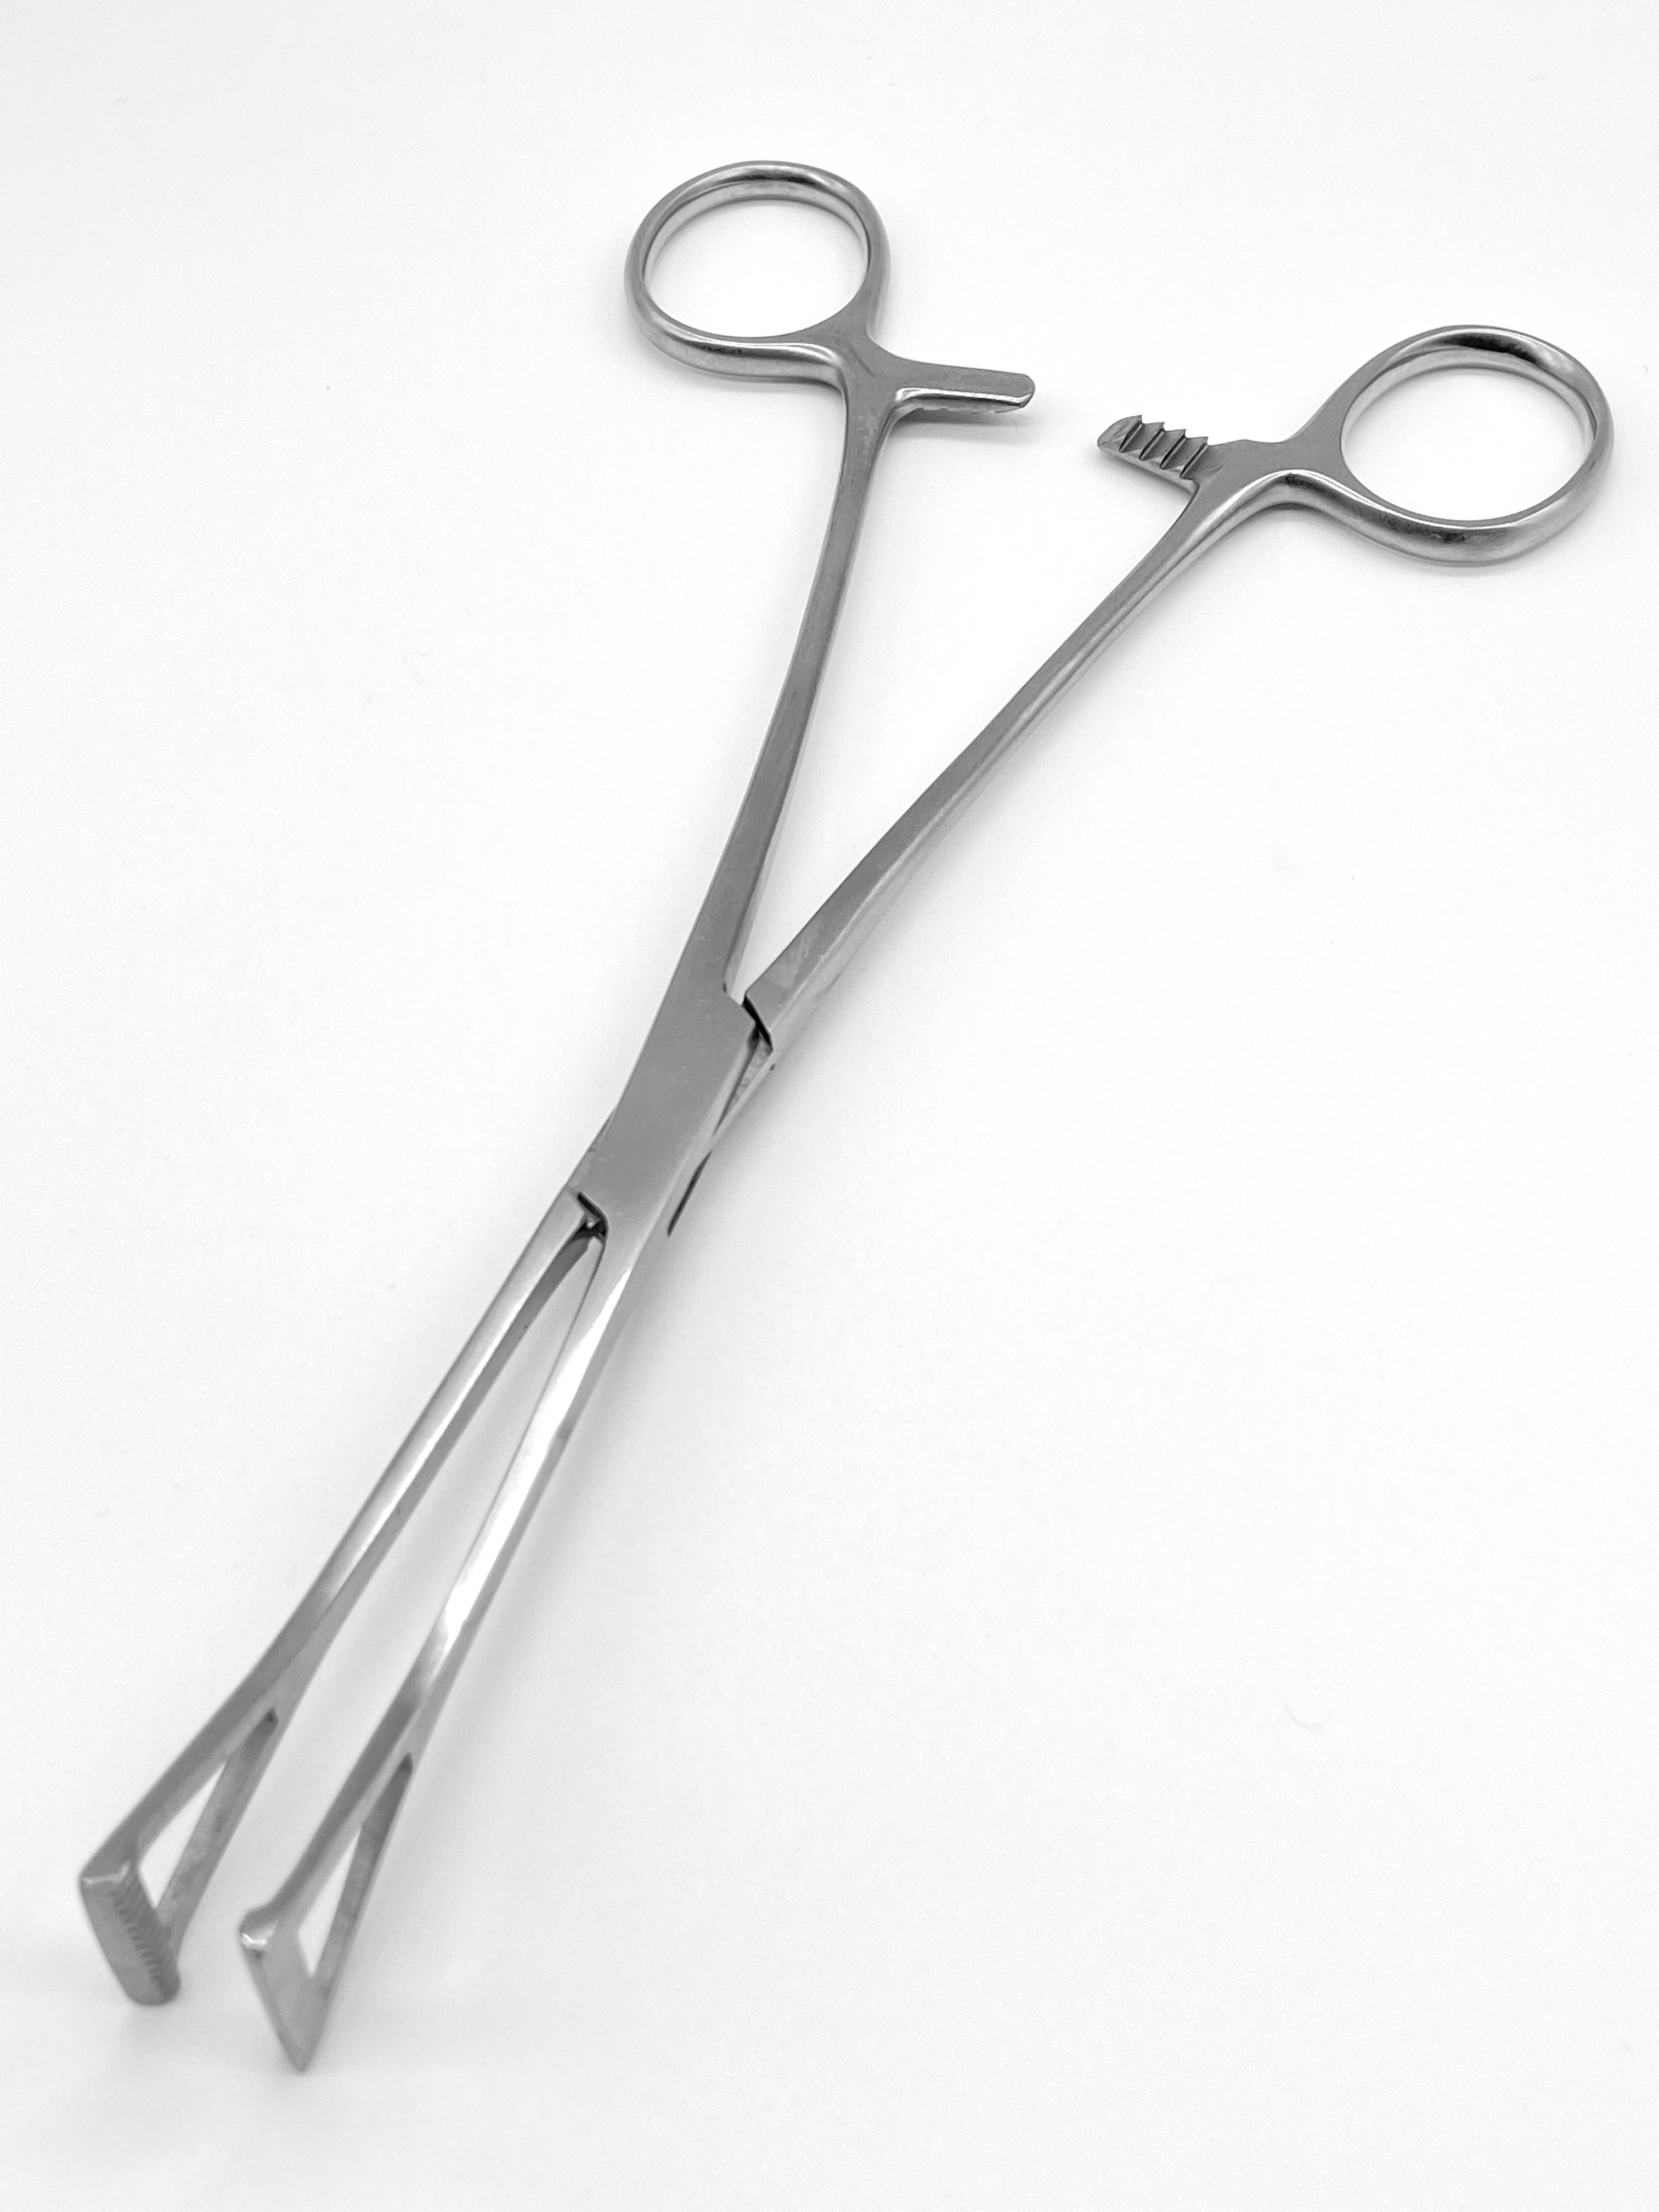 Artery Forceps - Allies Tissue Holding Forceps Wide Open - Surgical Instruments